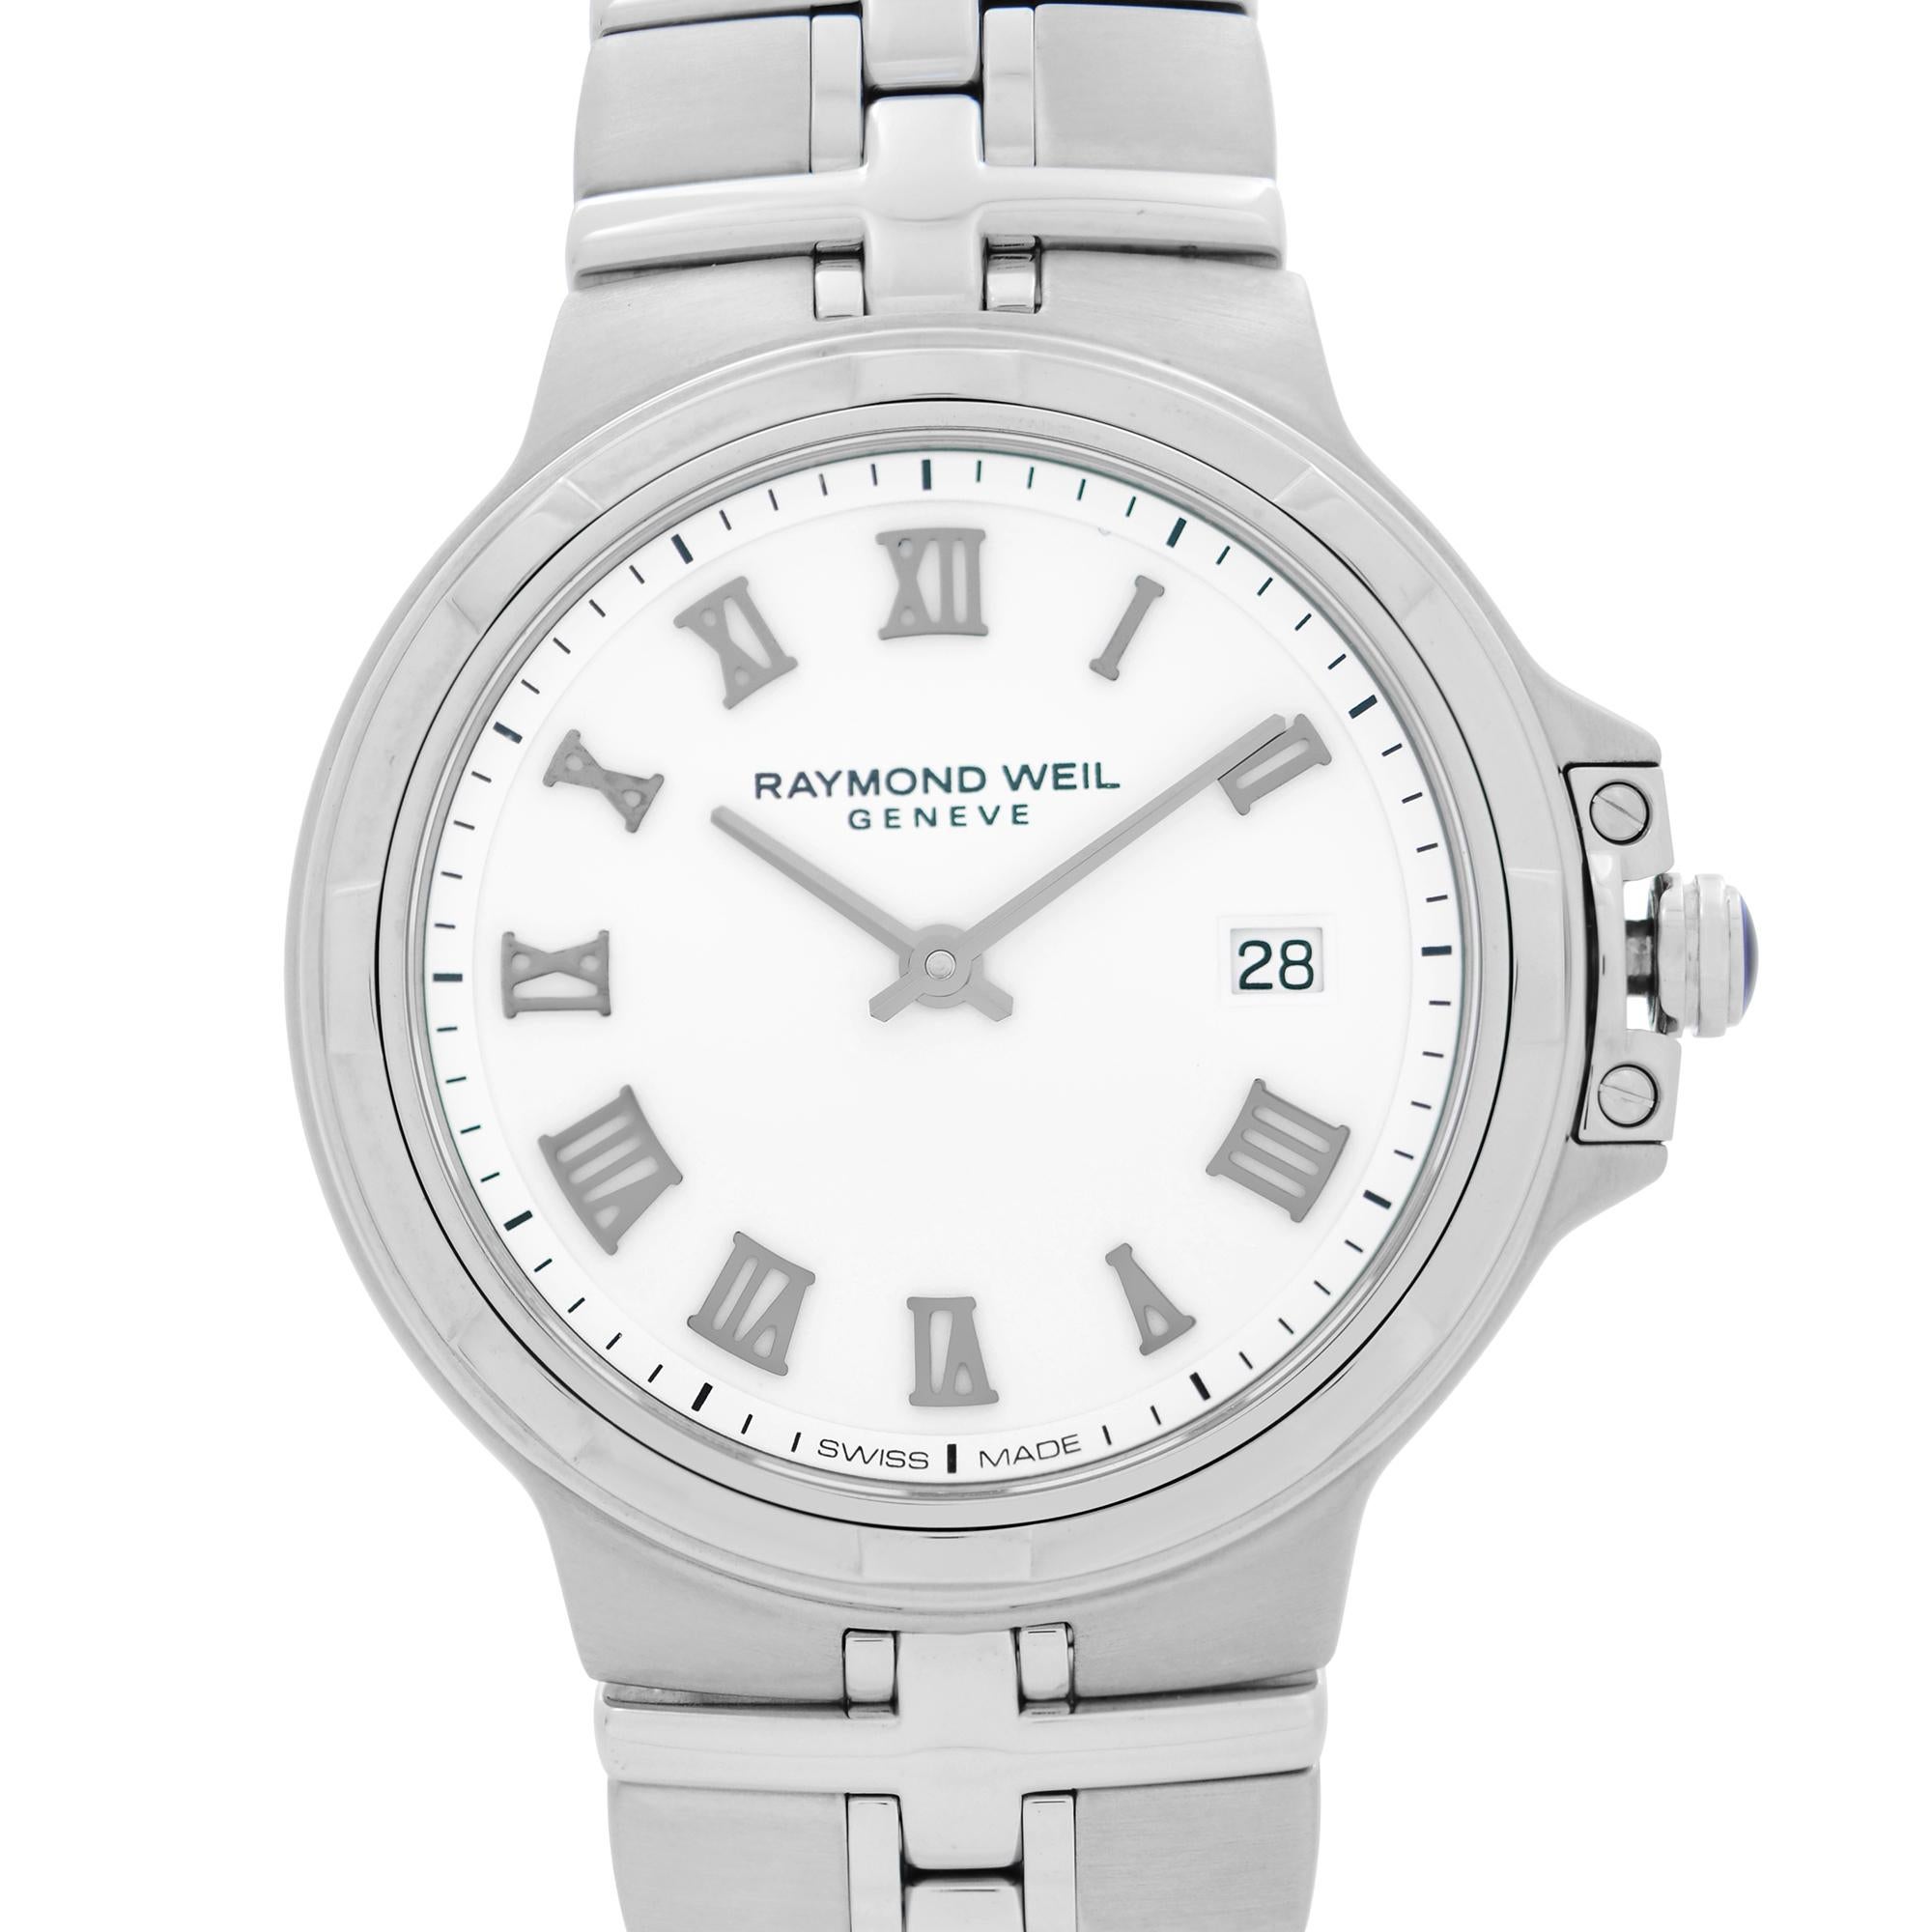 Unworn Raymond Weil Parsifal Steel White Roman Dial Quartz Ladies Watch 5180-ST-00300. This Beautiful Timepiece Features: Stainless Steel Case and Bracelet, Fixed Stainless Steel Bezel, White Dial with Black Hands, and Roman Numeral Hour Markers.